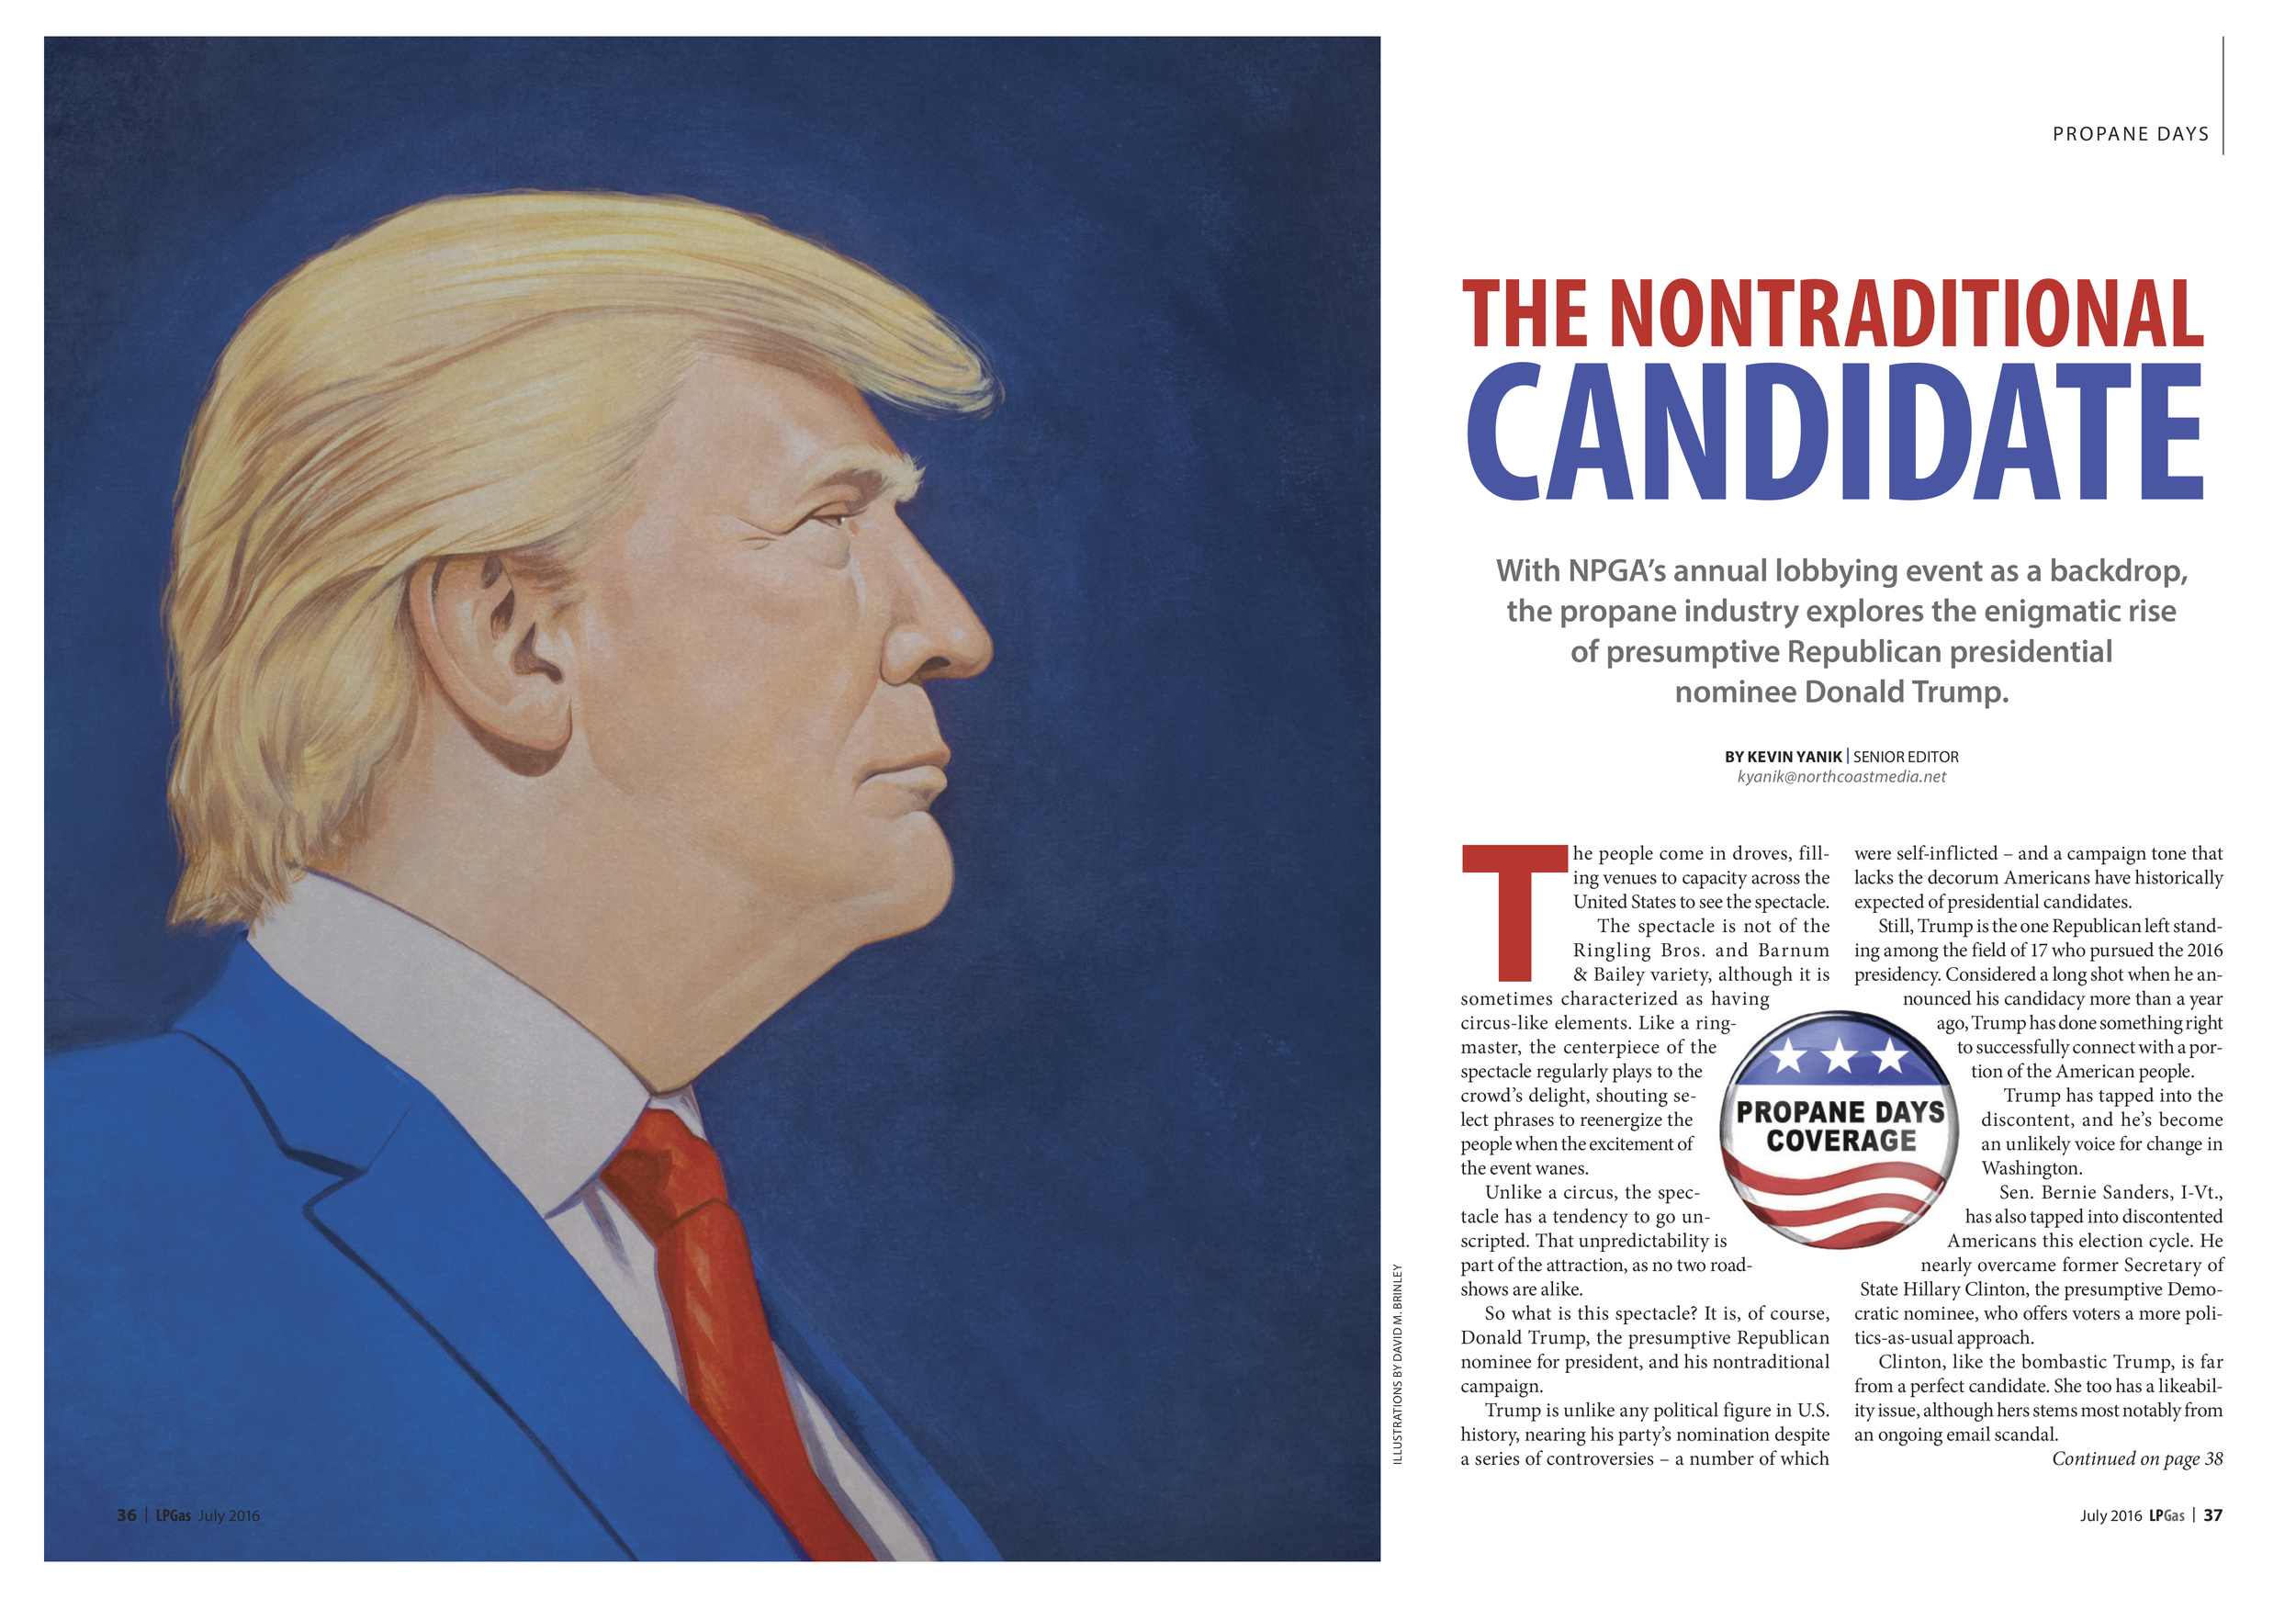   Donald Trump:&nbsp;The Nontraditional Candidate  &nbsp;| LPGas magazine July 2016 | What If?&nbsp;spread illustration  